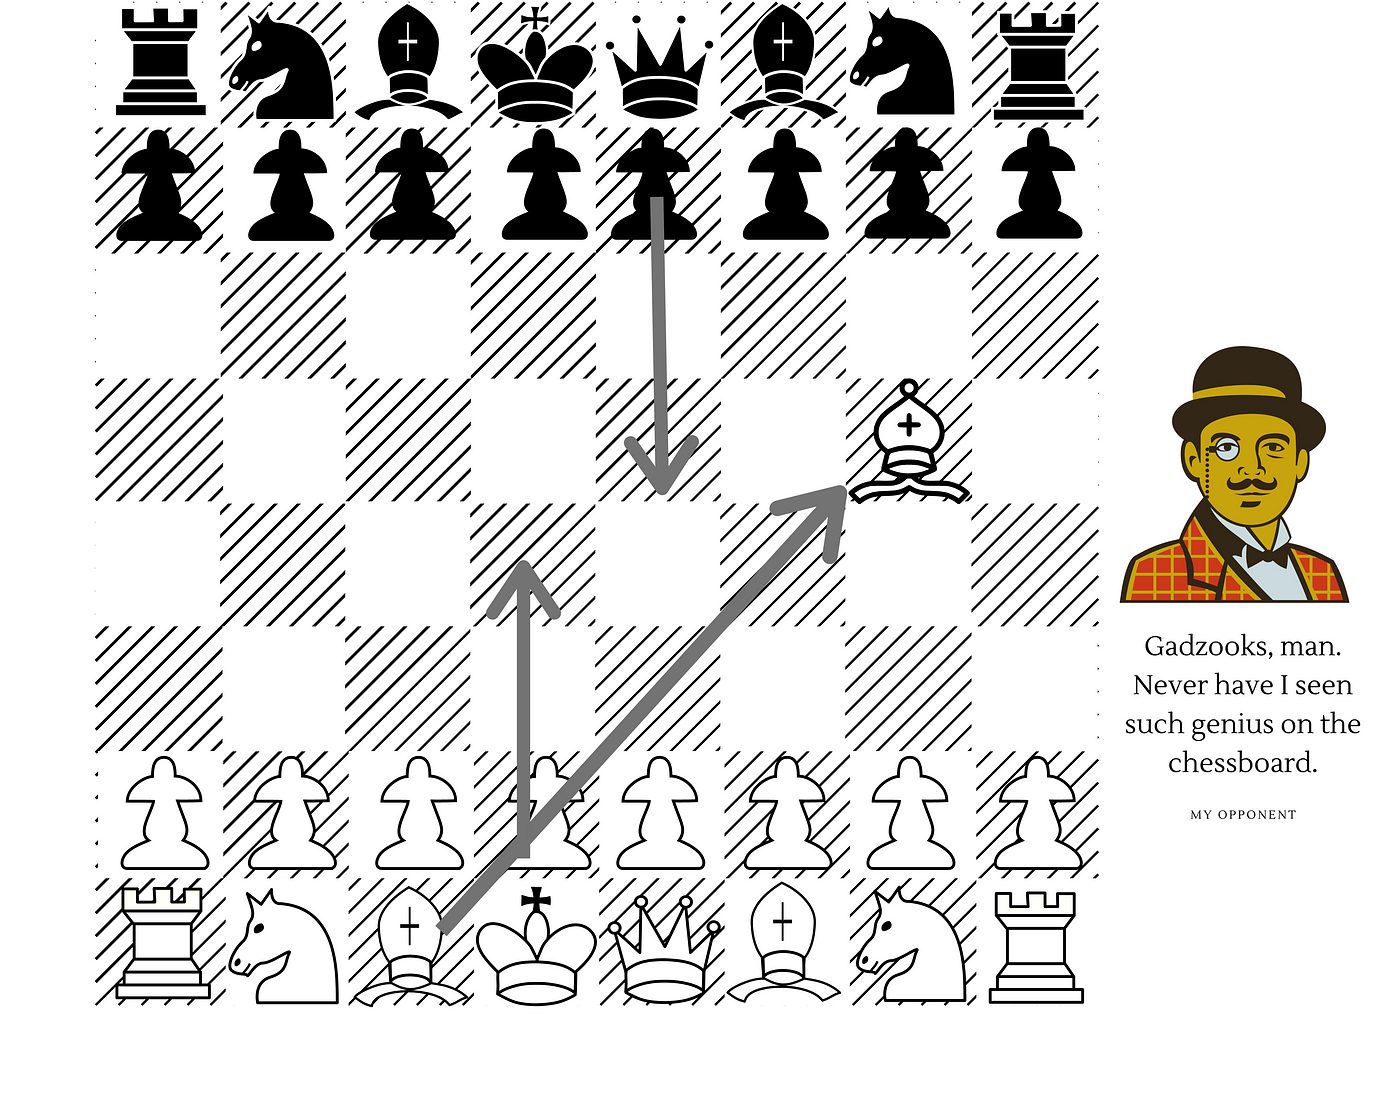 My online chess addiction was ruining my life. Something had to